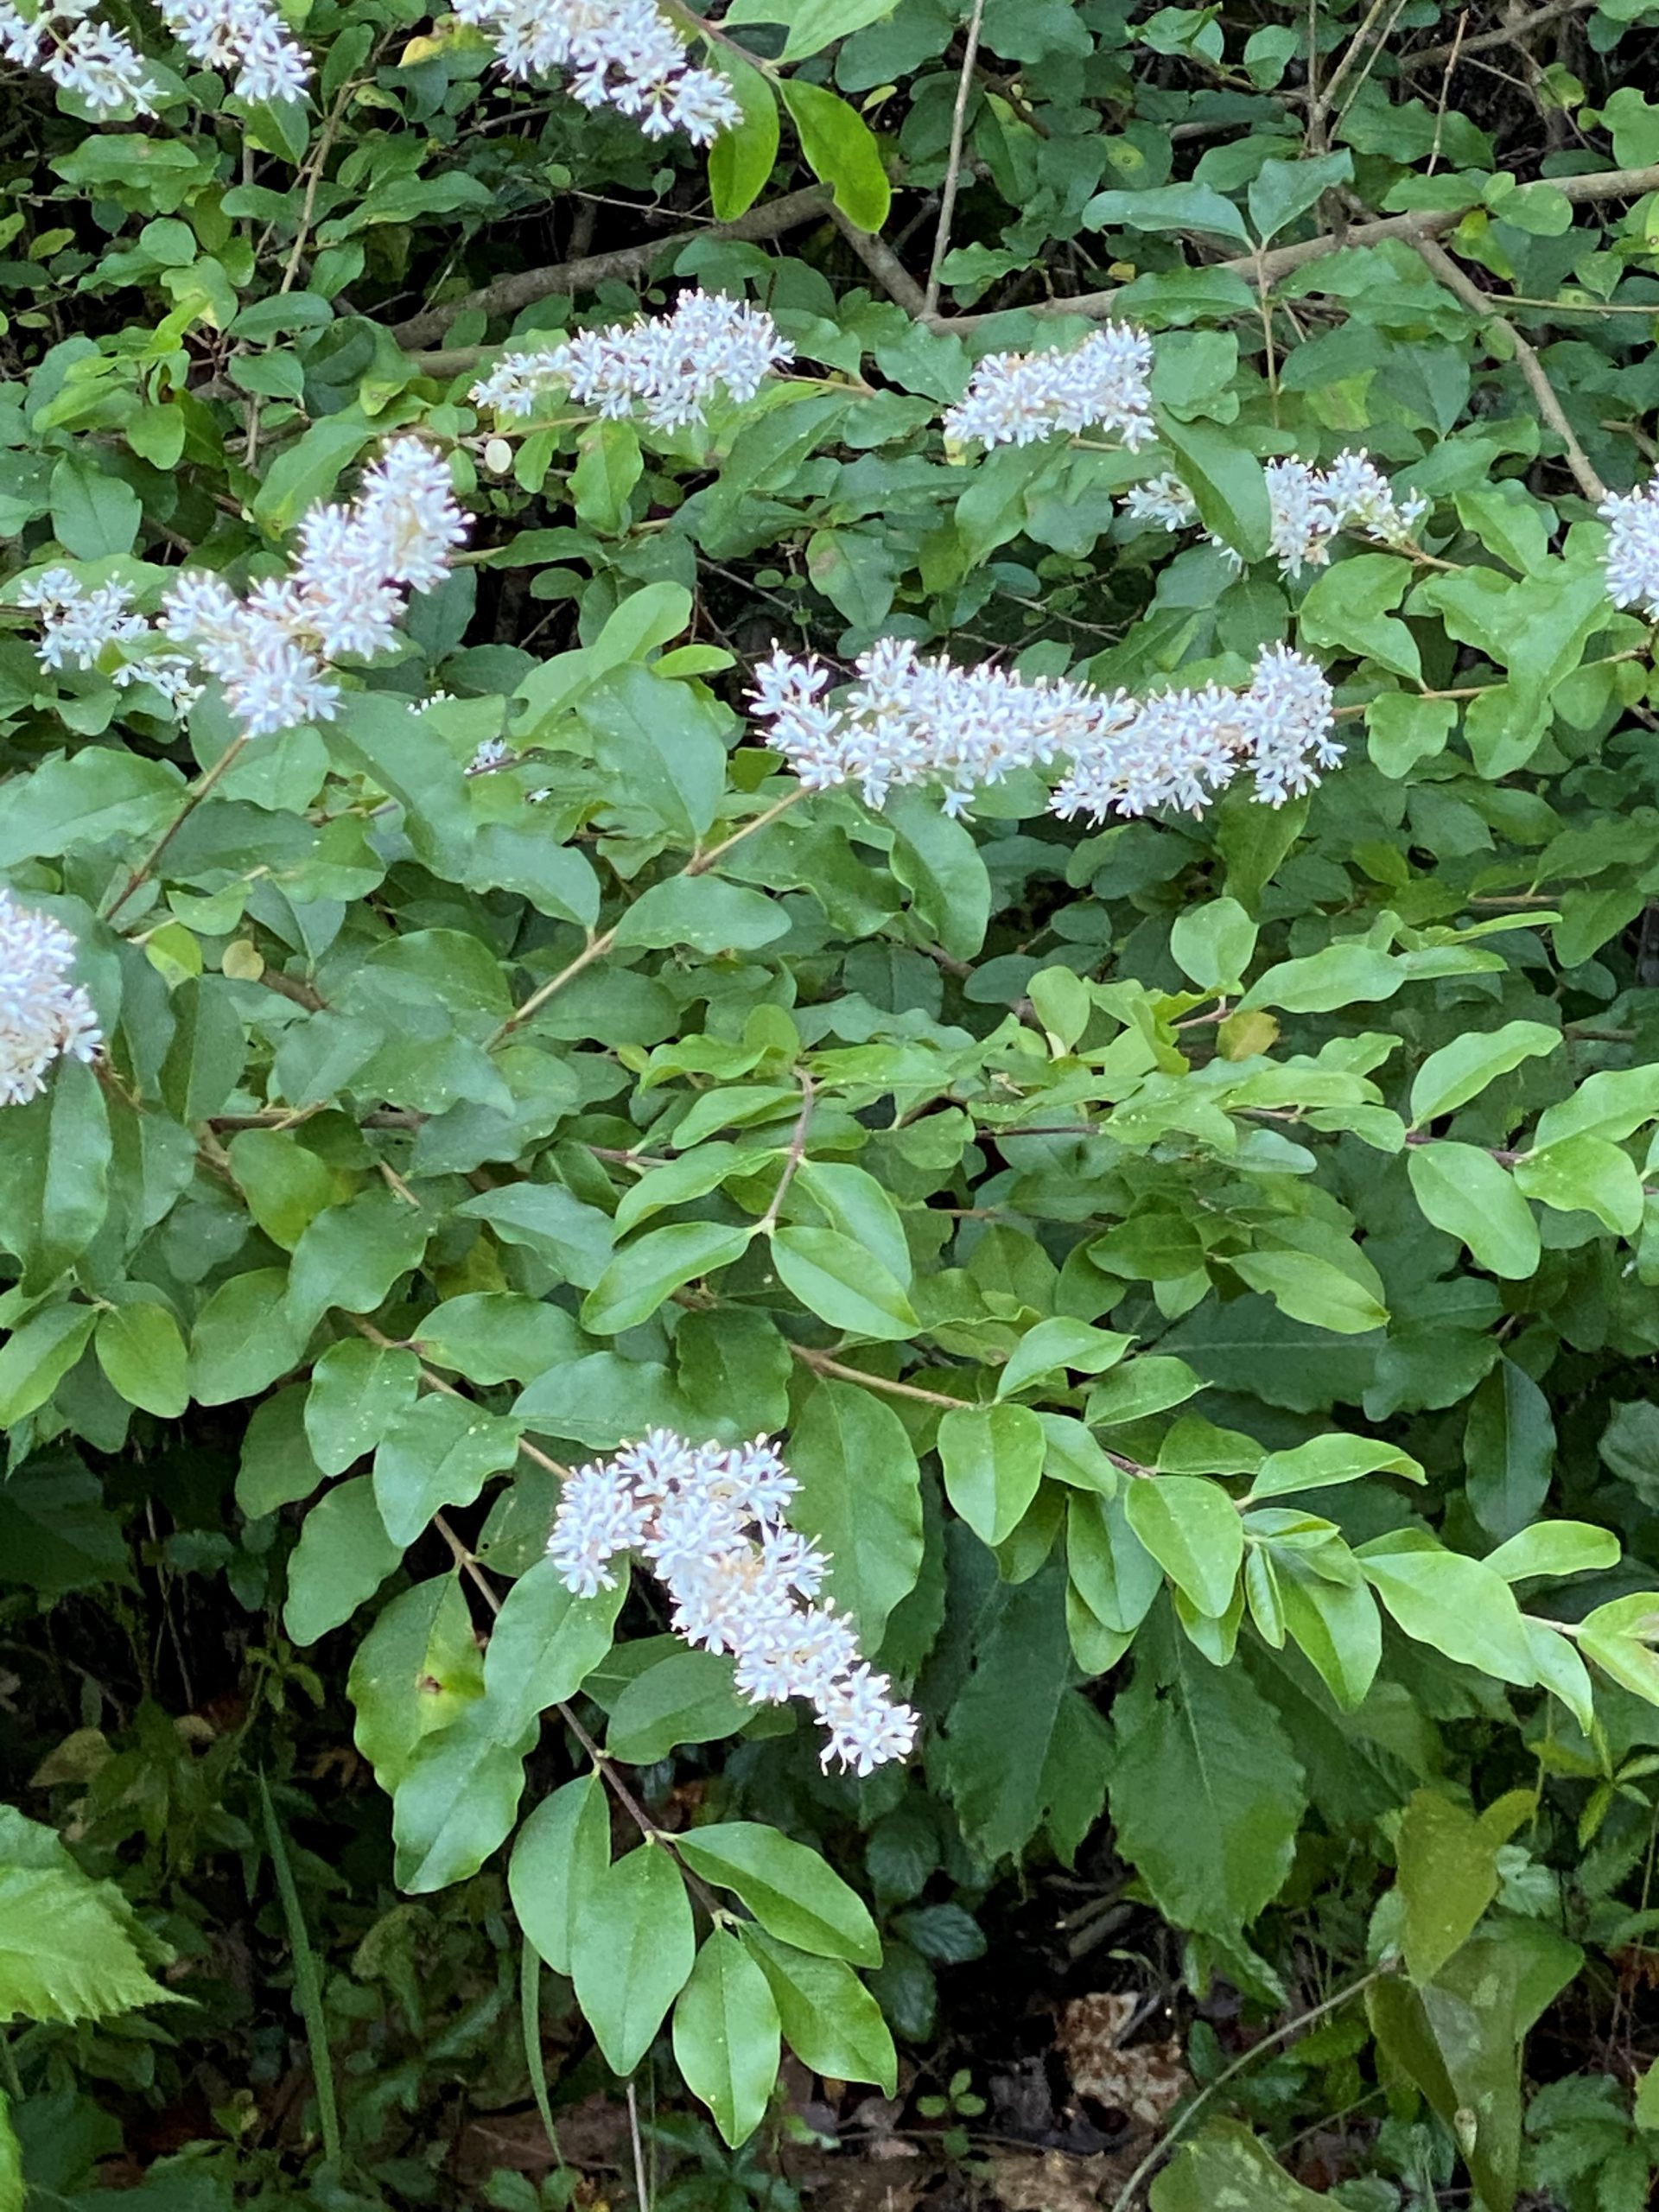 Six Rivers “Dirty Dozen” Invasive Species of the Month – Chinese Privet